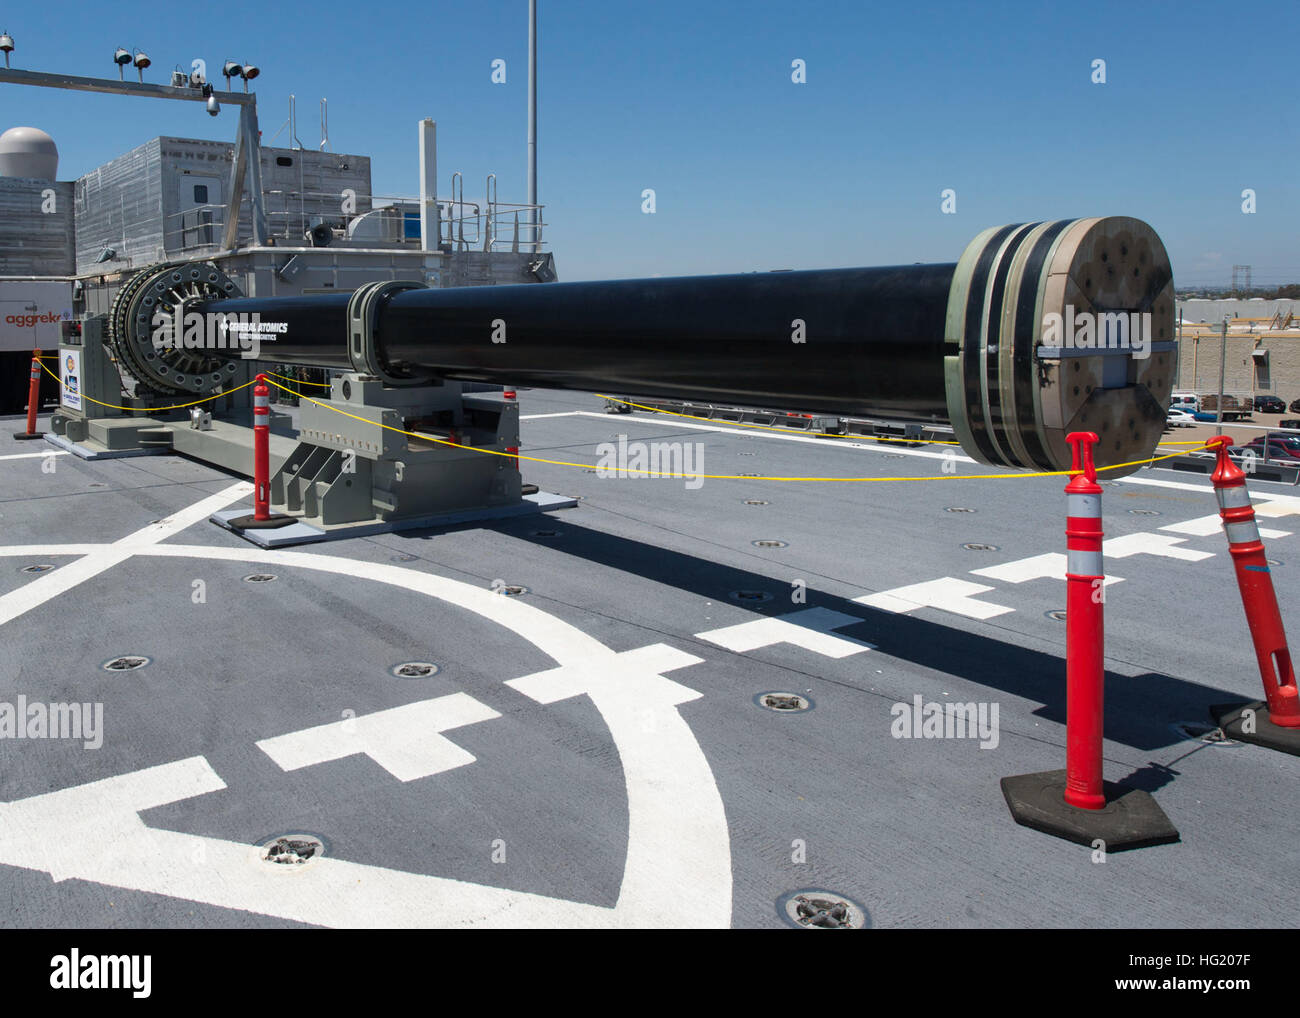 One of two electromagnetic railgun prototypes on display aboard joint high speed vessel USS Millinocket (JHSV 3) in port at Naval Base San Diego. The railguns are being displayed in San Diego as part of the Electromagnetic Launch Symposium, which brought together representatives from the U.S. and allied navies, industry and academia to discuss directed energy technologies. (U.S. Navy photo by Mass Communication Specialist 2nd Class Kristopher Kirsop/Released) USS Millinocket operations 140708-N-ZK869-003 Stock Photo